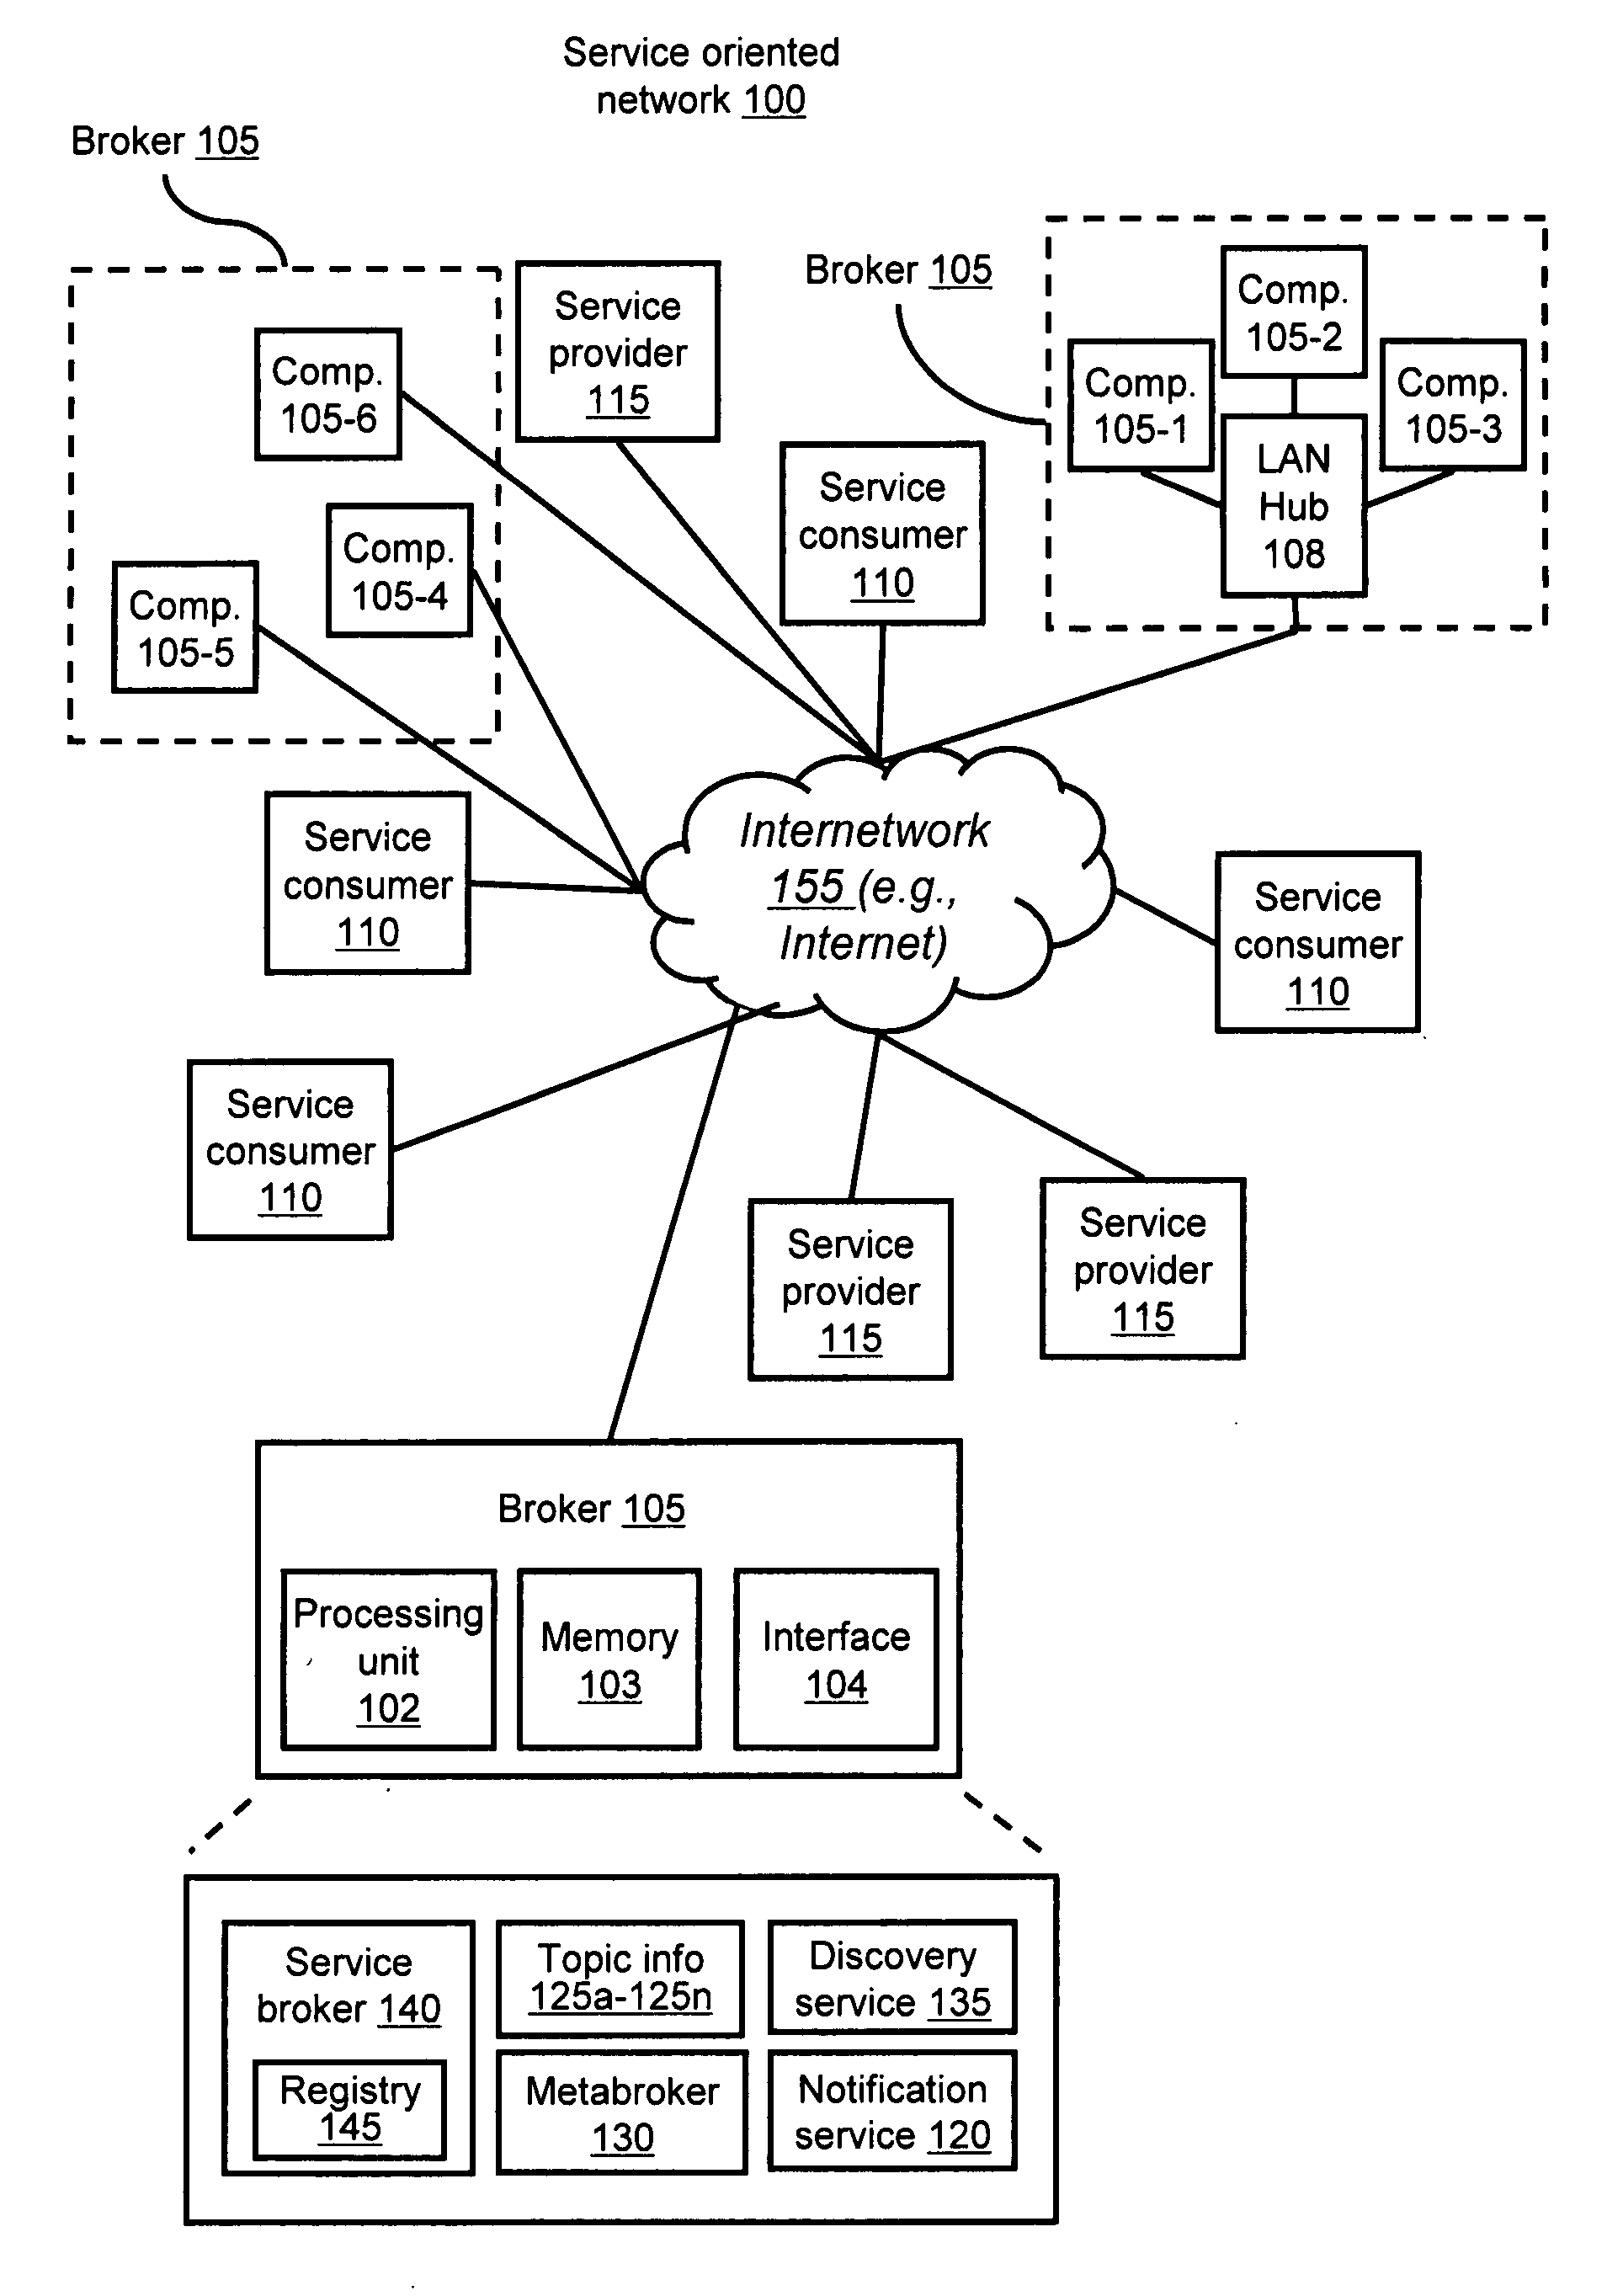 System and method for dynamic data discovery in service oriented networks with peer-to-peer based communication